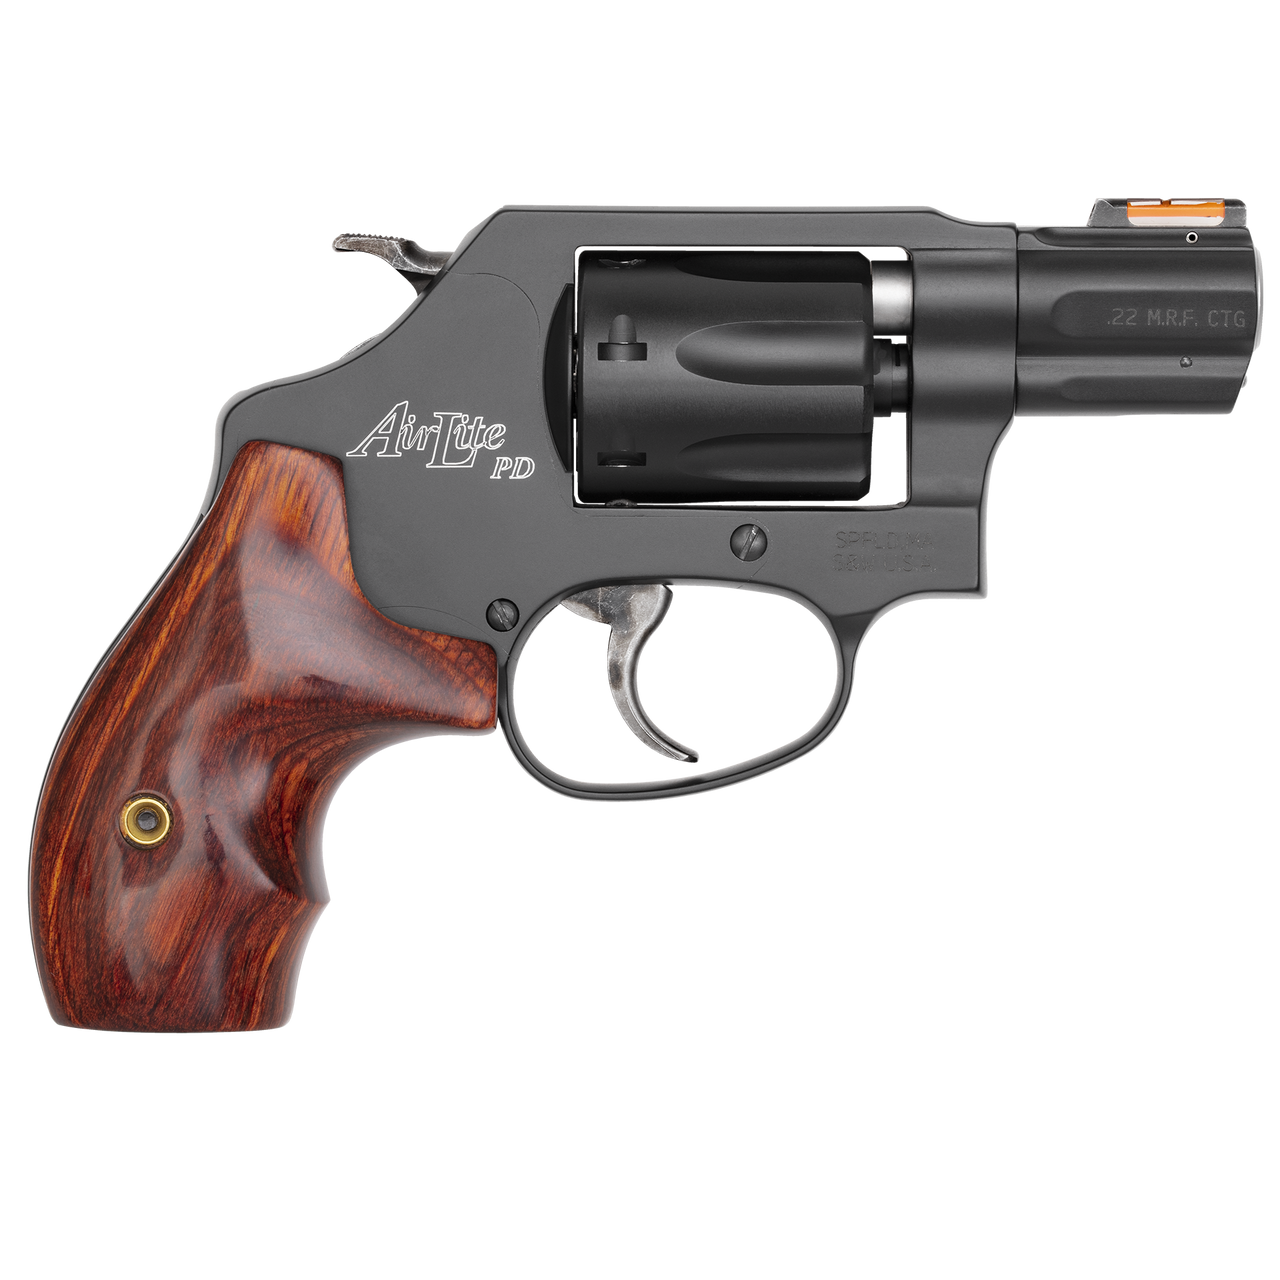 Buy Smith & Wesson Model 351 PD Revolver Online